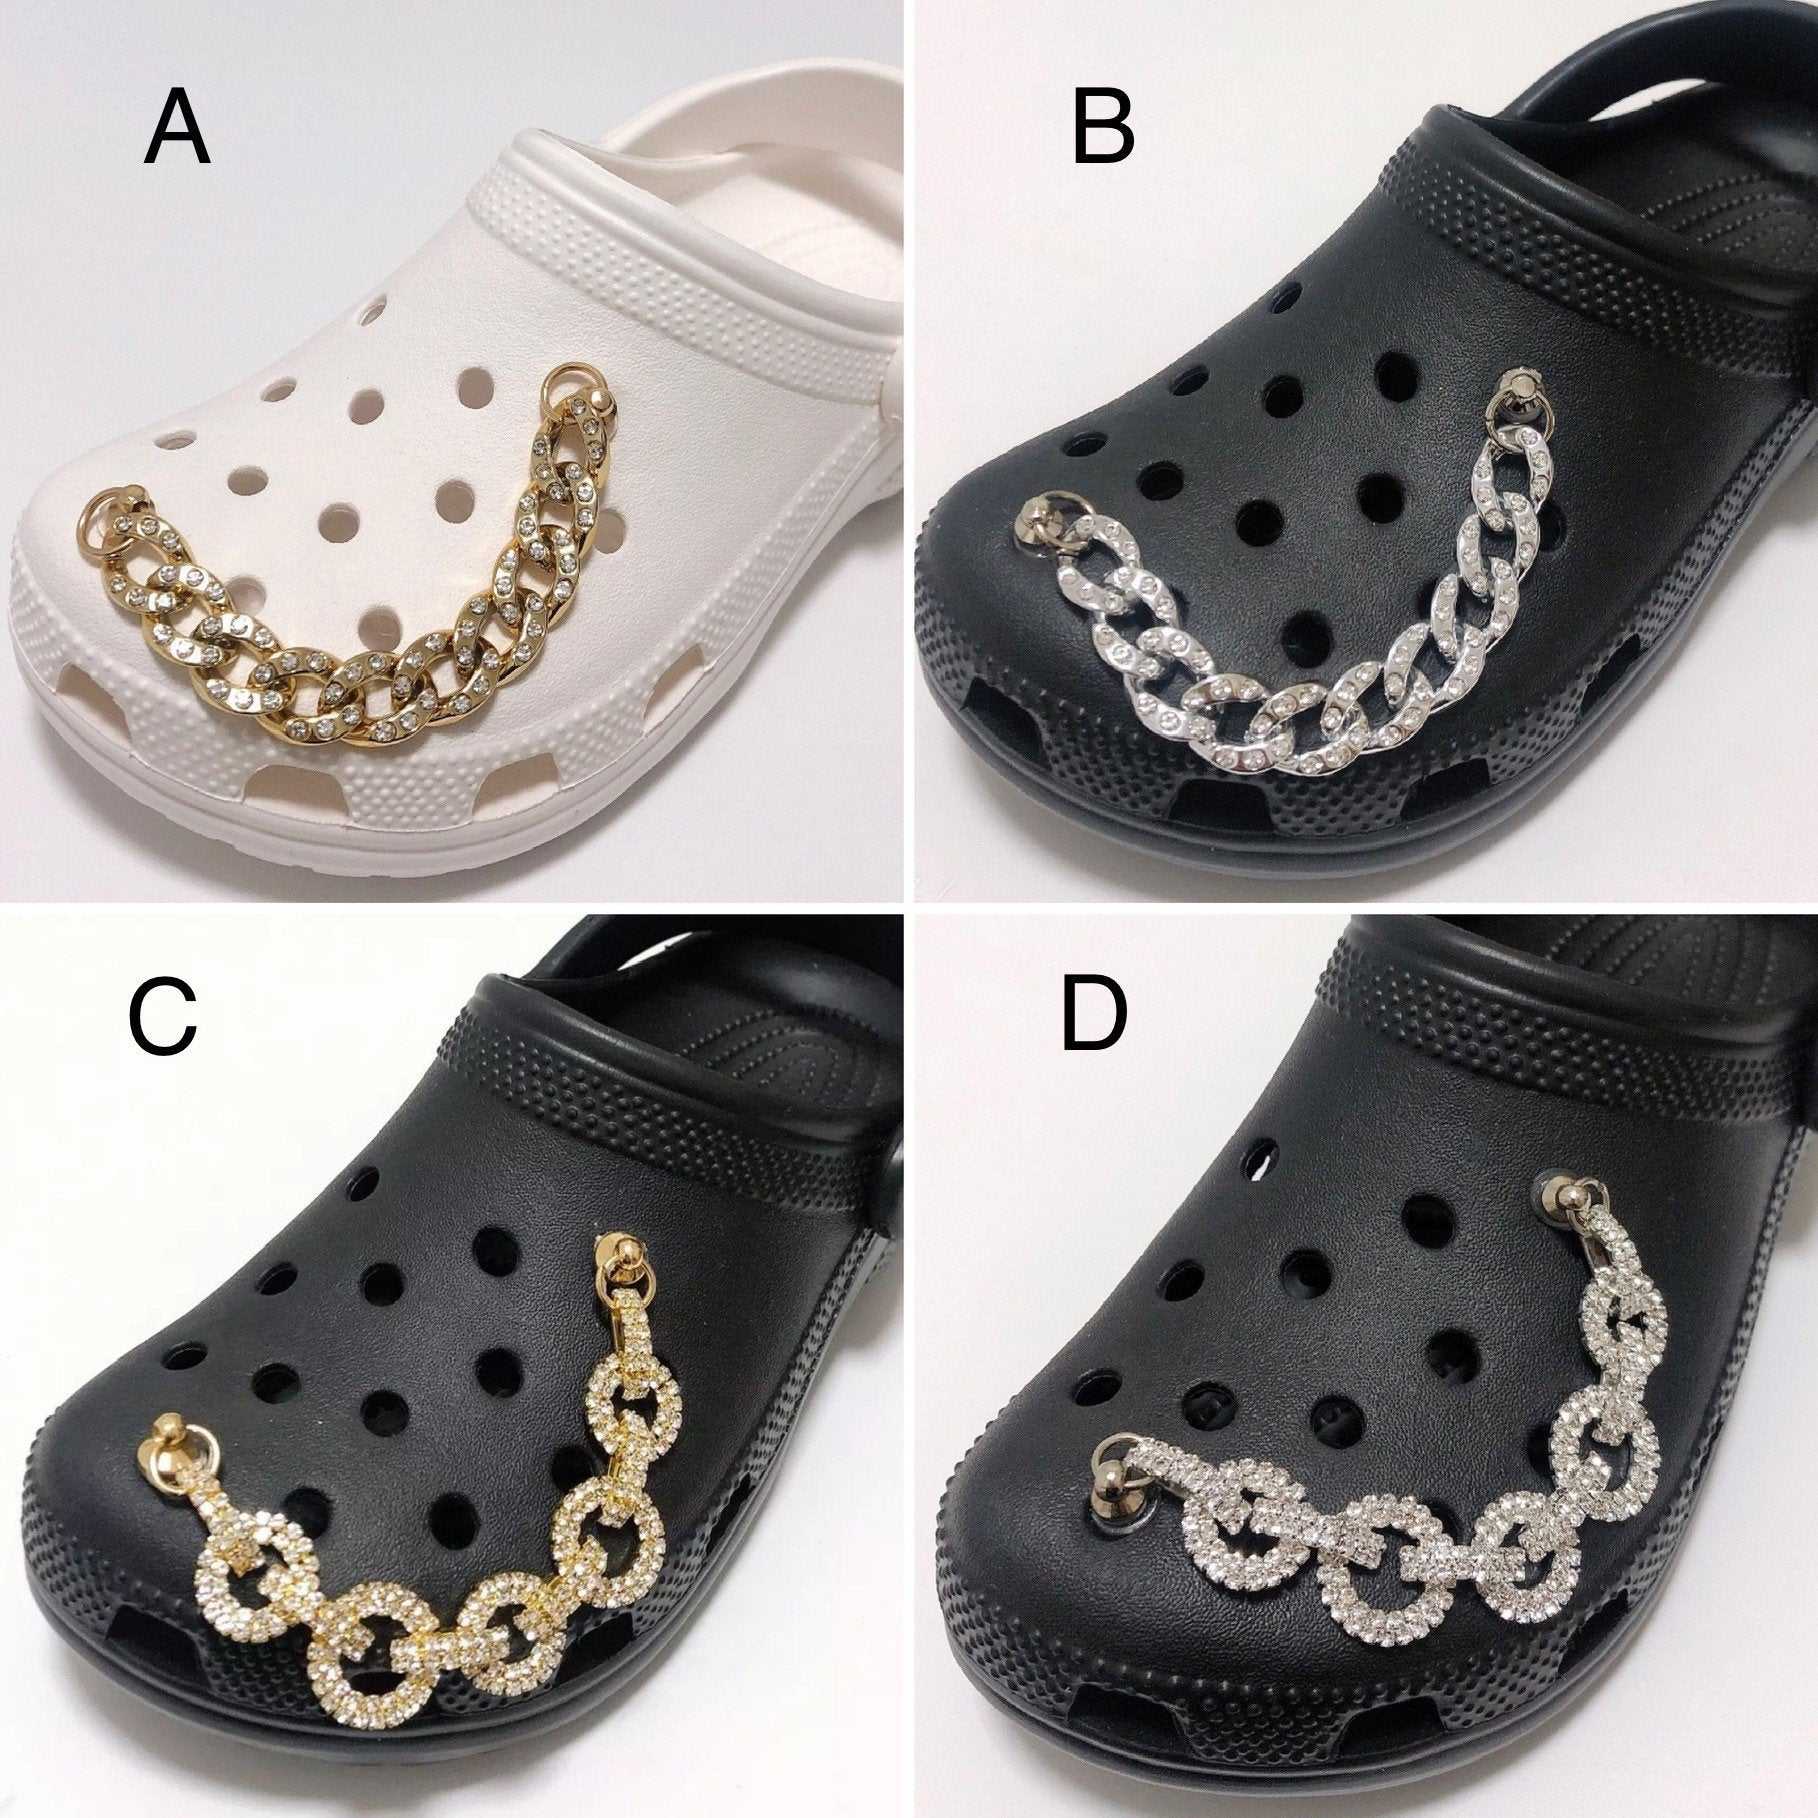 Christian Silver & Gold Jewelry Shoe Charms for Crocs $7.95 ea or $35 for  all 7